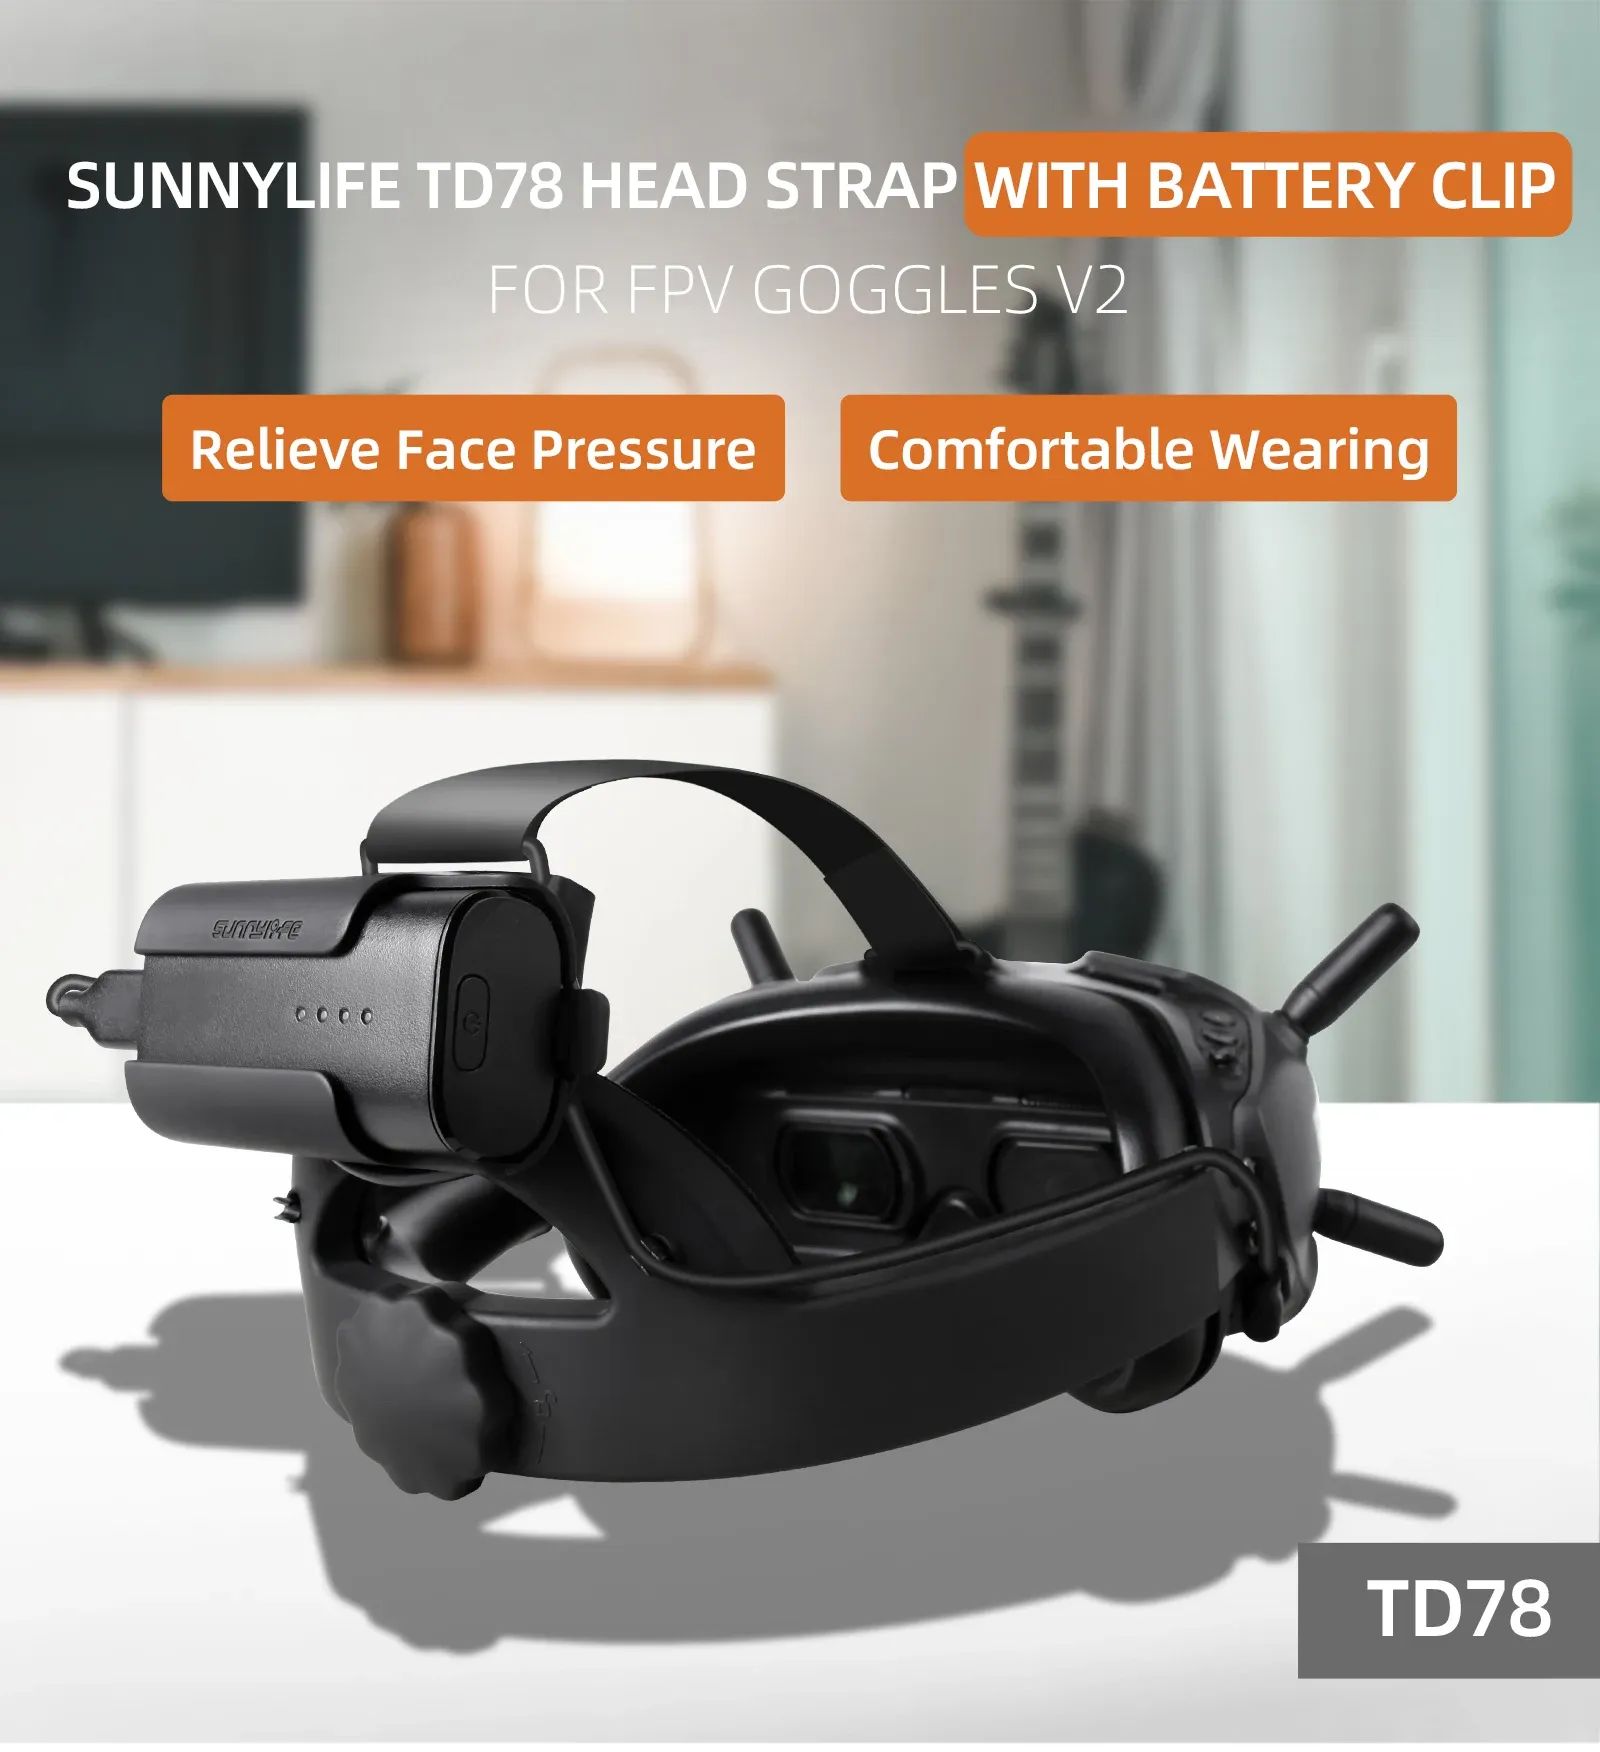 Drones Goggles V2 Adjustable Head Strap with Battery Clip Relieve Face Pressure Replacement Strap for Avata/FPV Goggles V2 Accessories